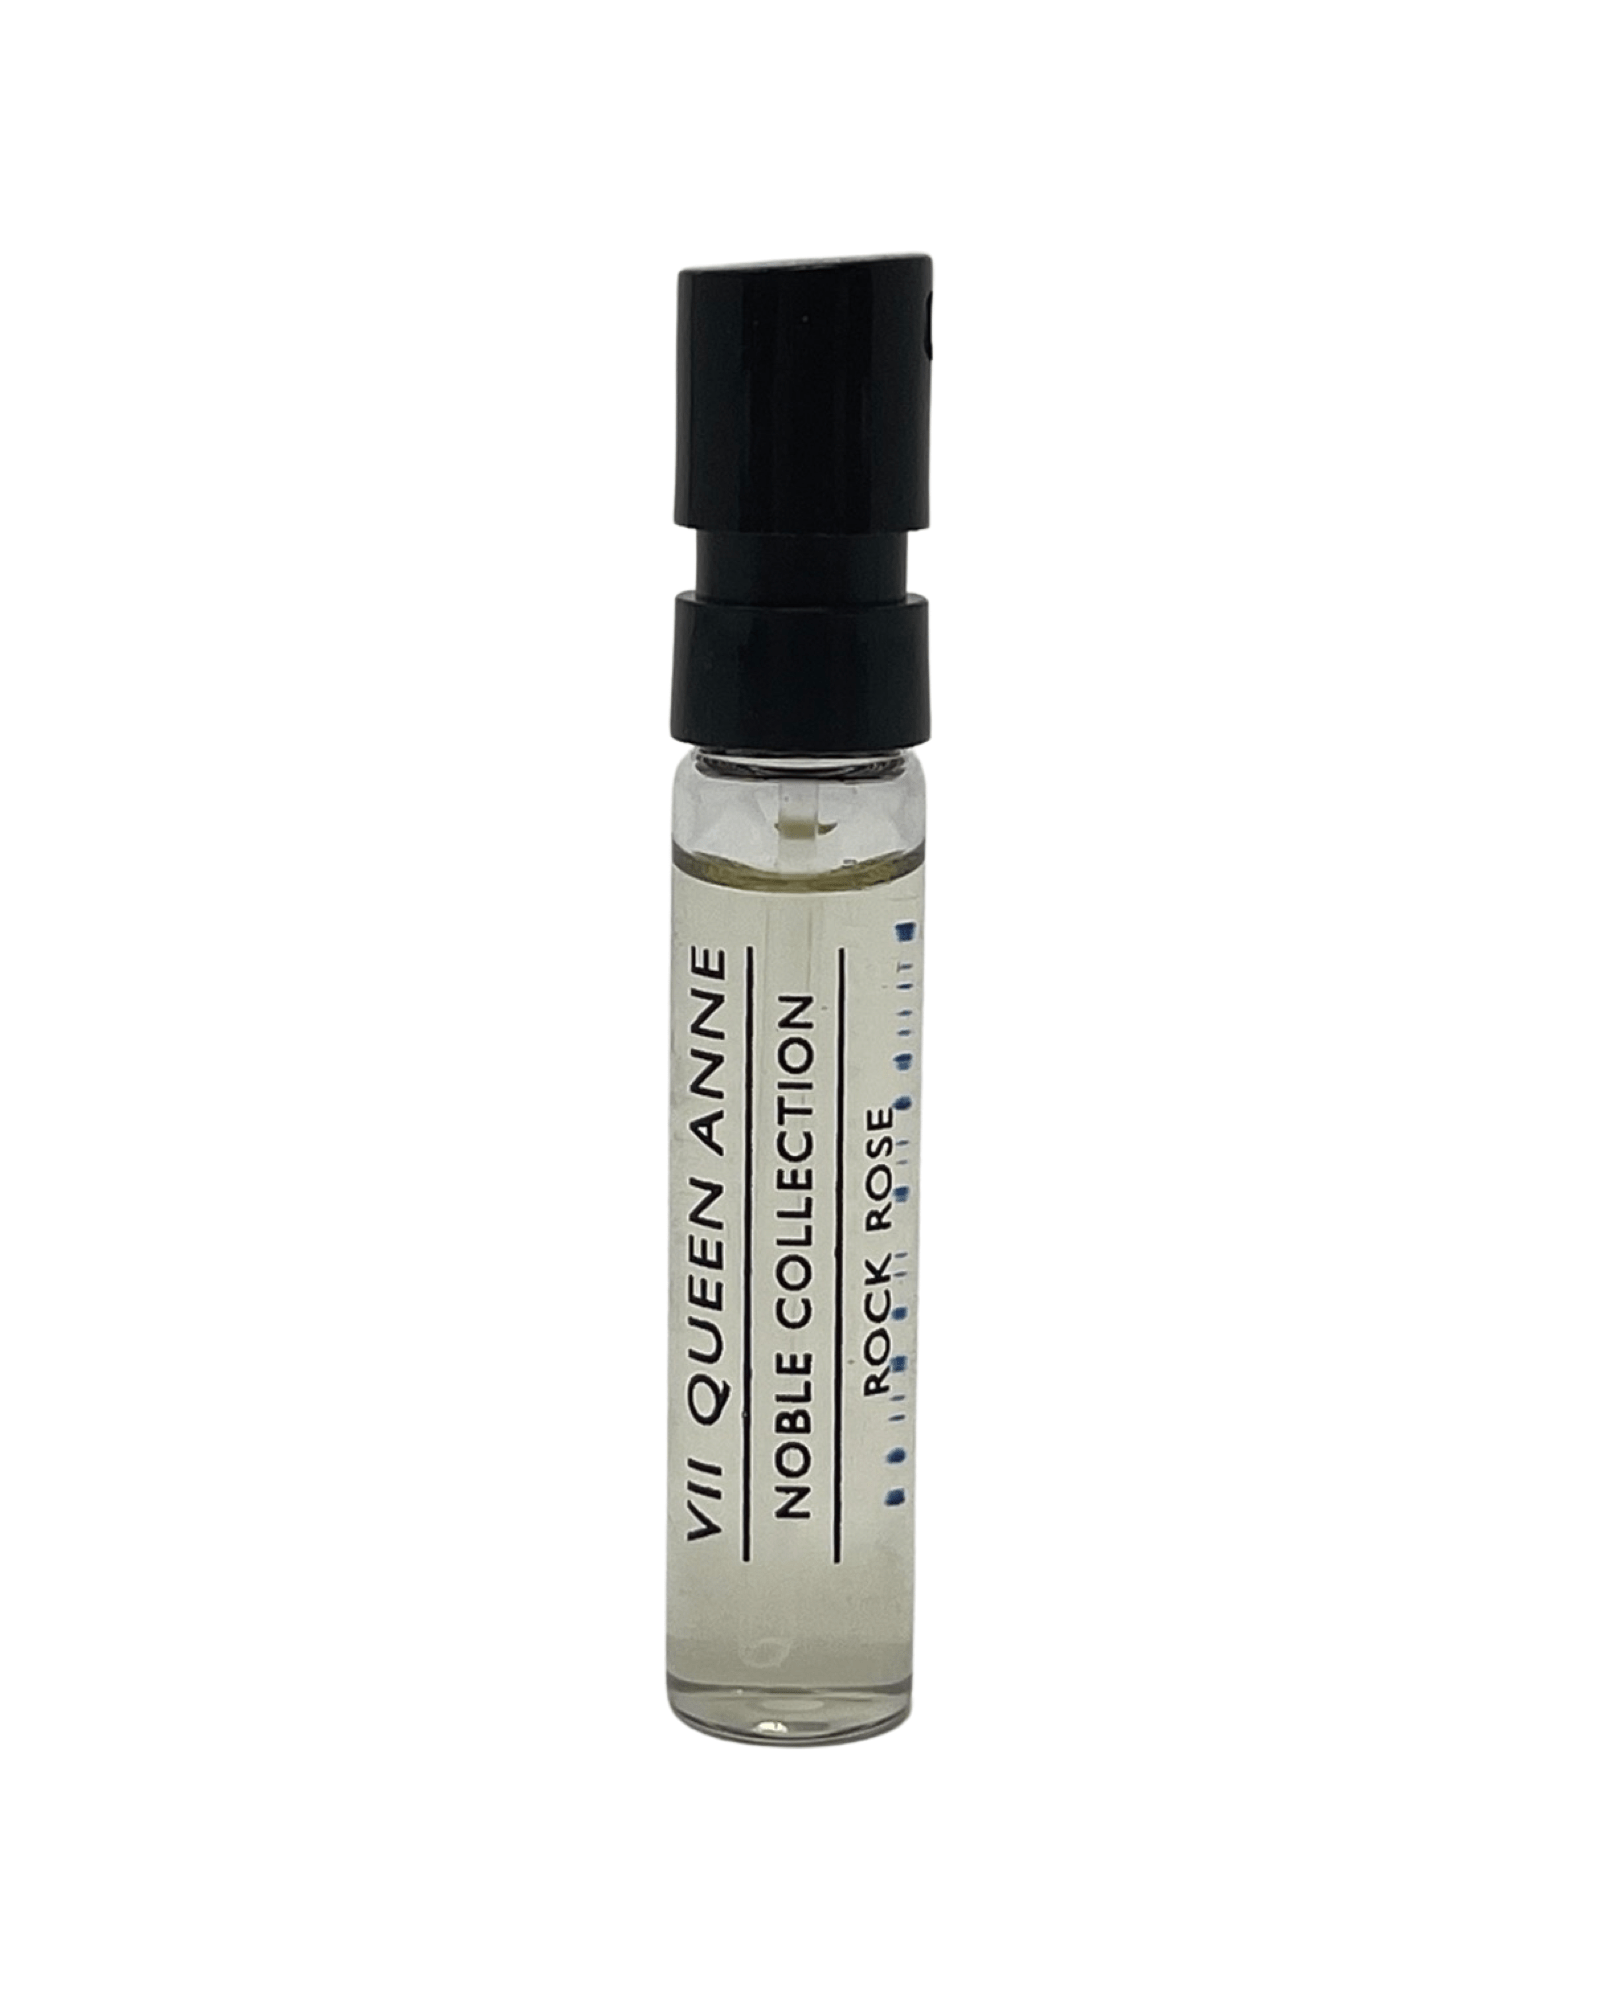 Clive Christian - Rock Rose - 2ml.